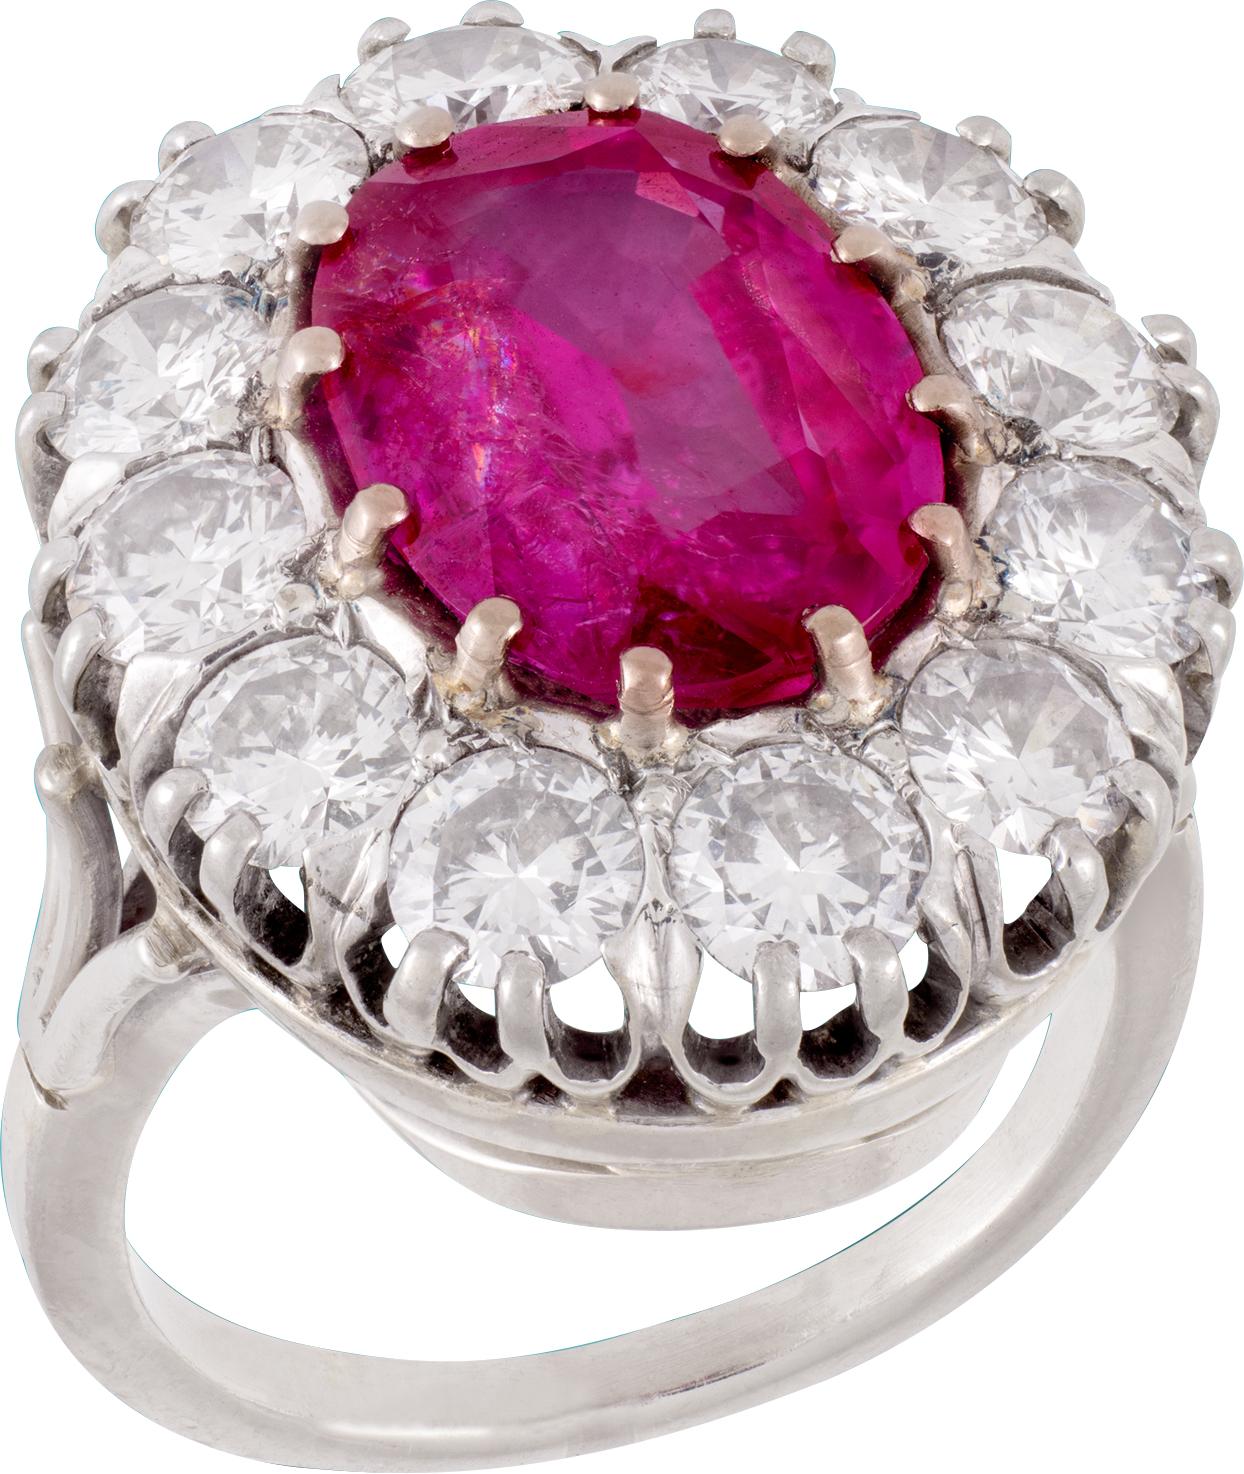 Centering a 5.52 Carat Unheated Burma Ruby (per AGL– American Gem Laboratory), framed by Round-Brilliant Cut Diamonds weighing roughly 3.00 carats, and set in 18k white gold and platinum, this Art Deco ring encapsulates the quality craftsmanship of